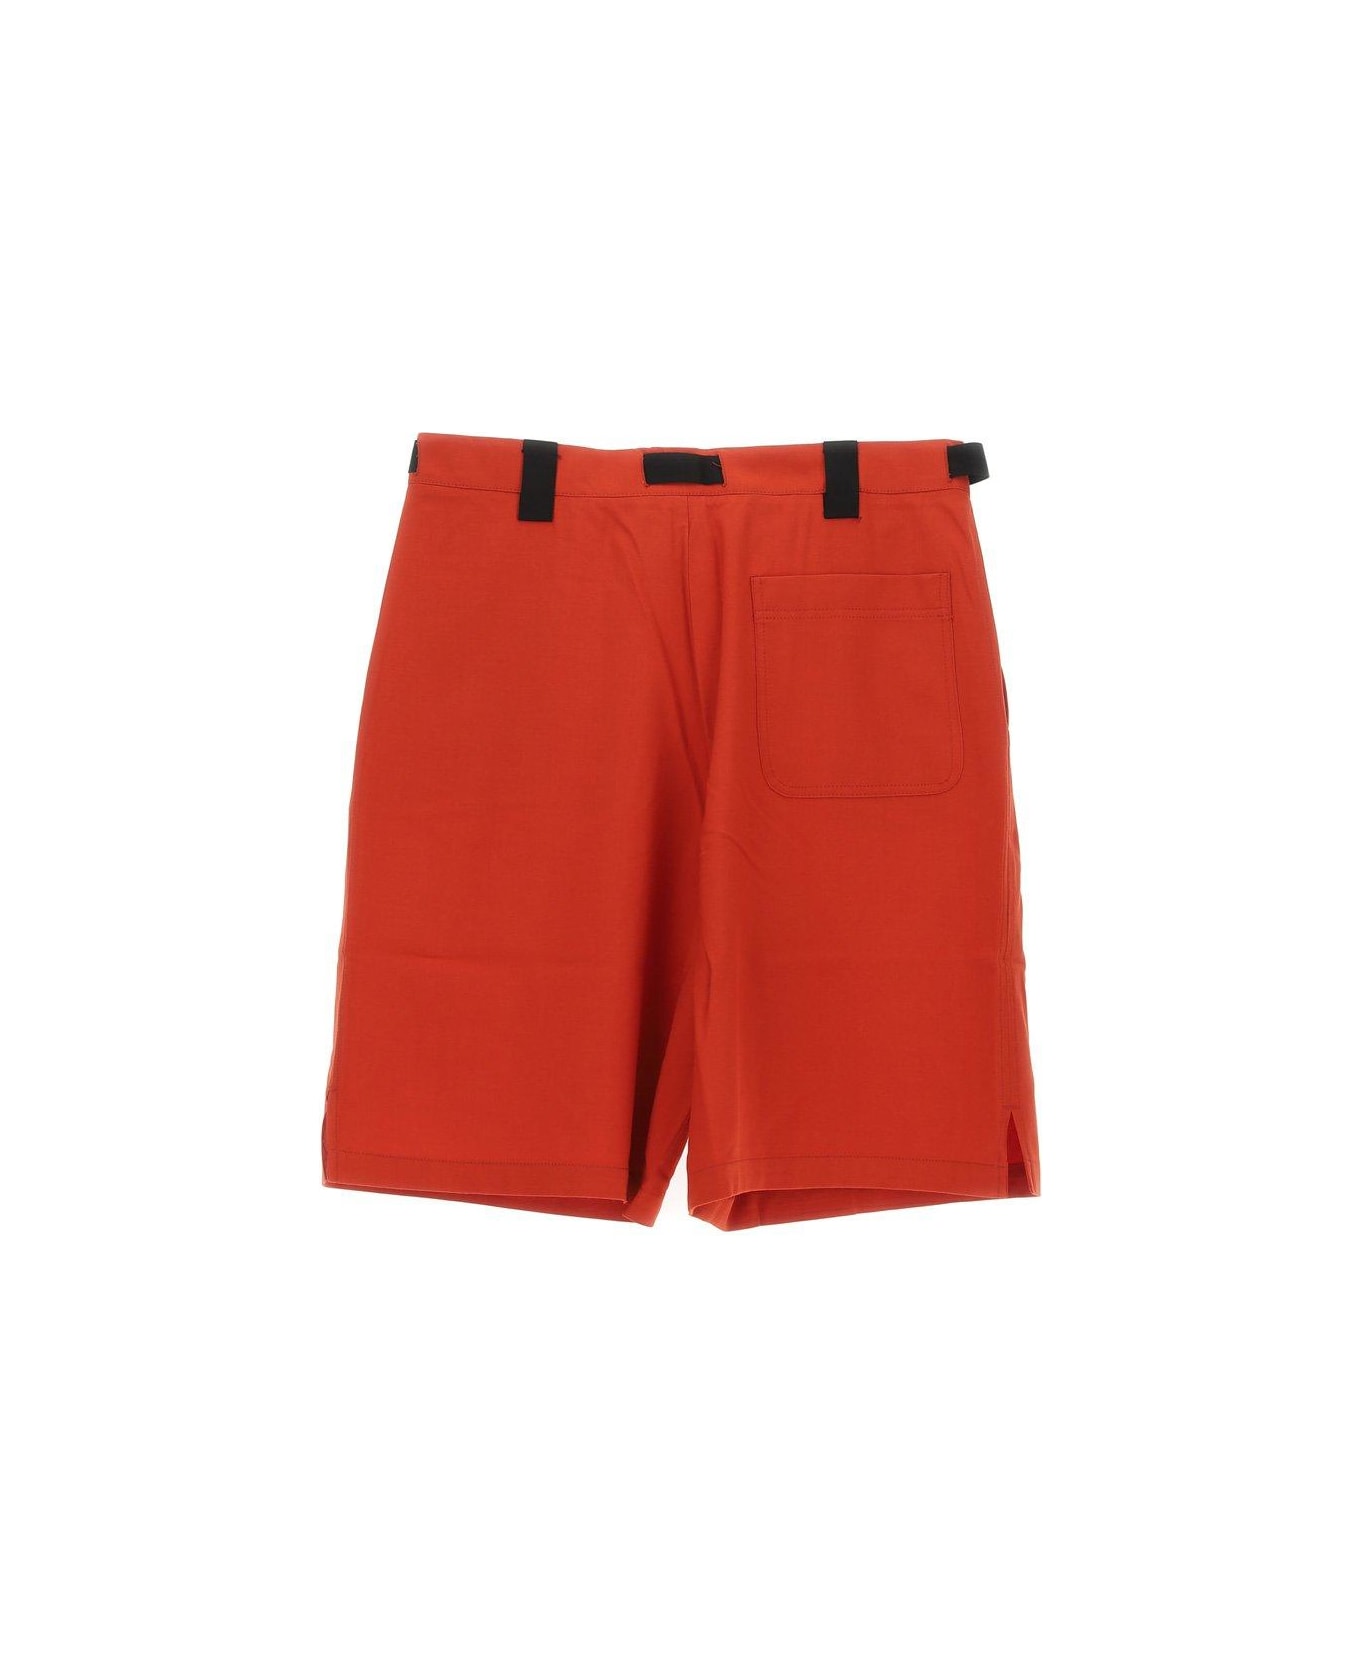 Jacquemus Buckled Shorts - Red